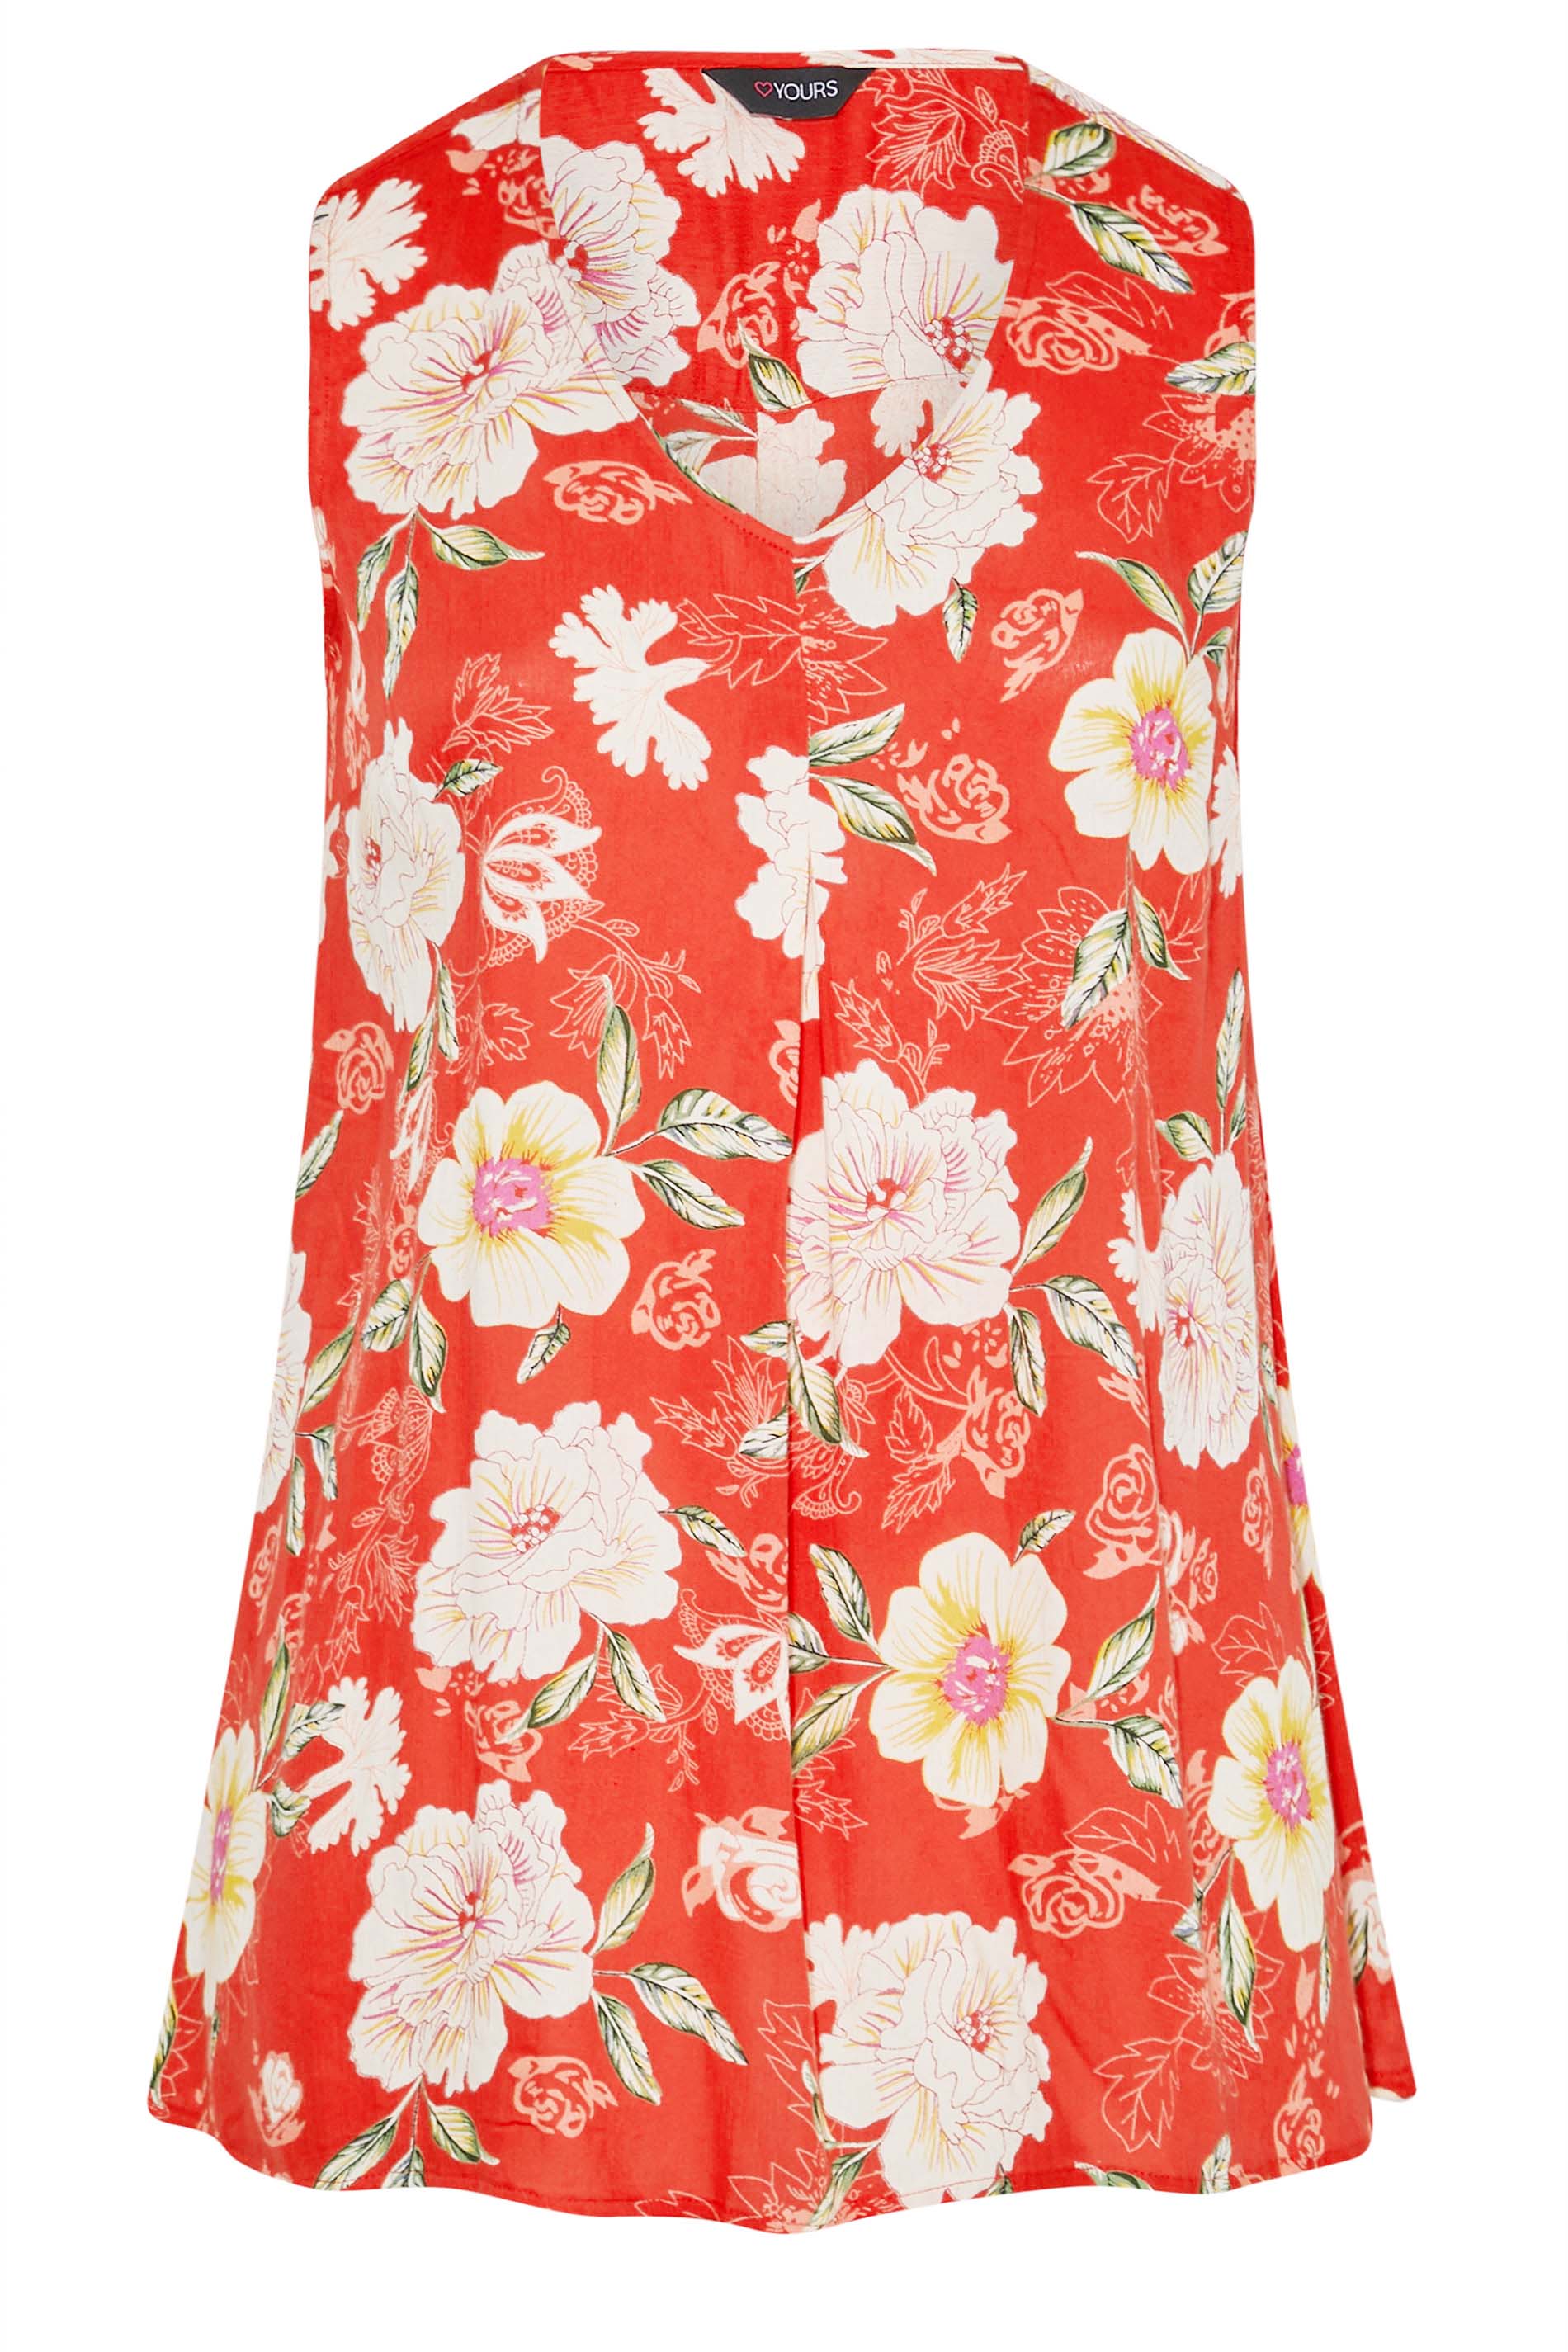 Grande taille  Tops Grande taille  Tops Casual | Curve Red Floral Swing Vest Top - XQ95308